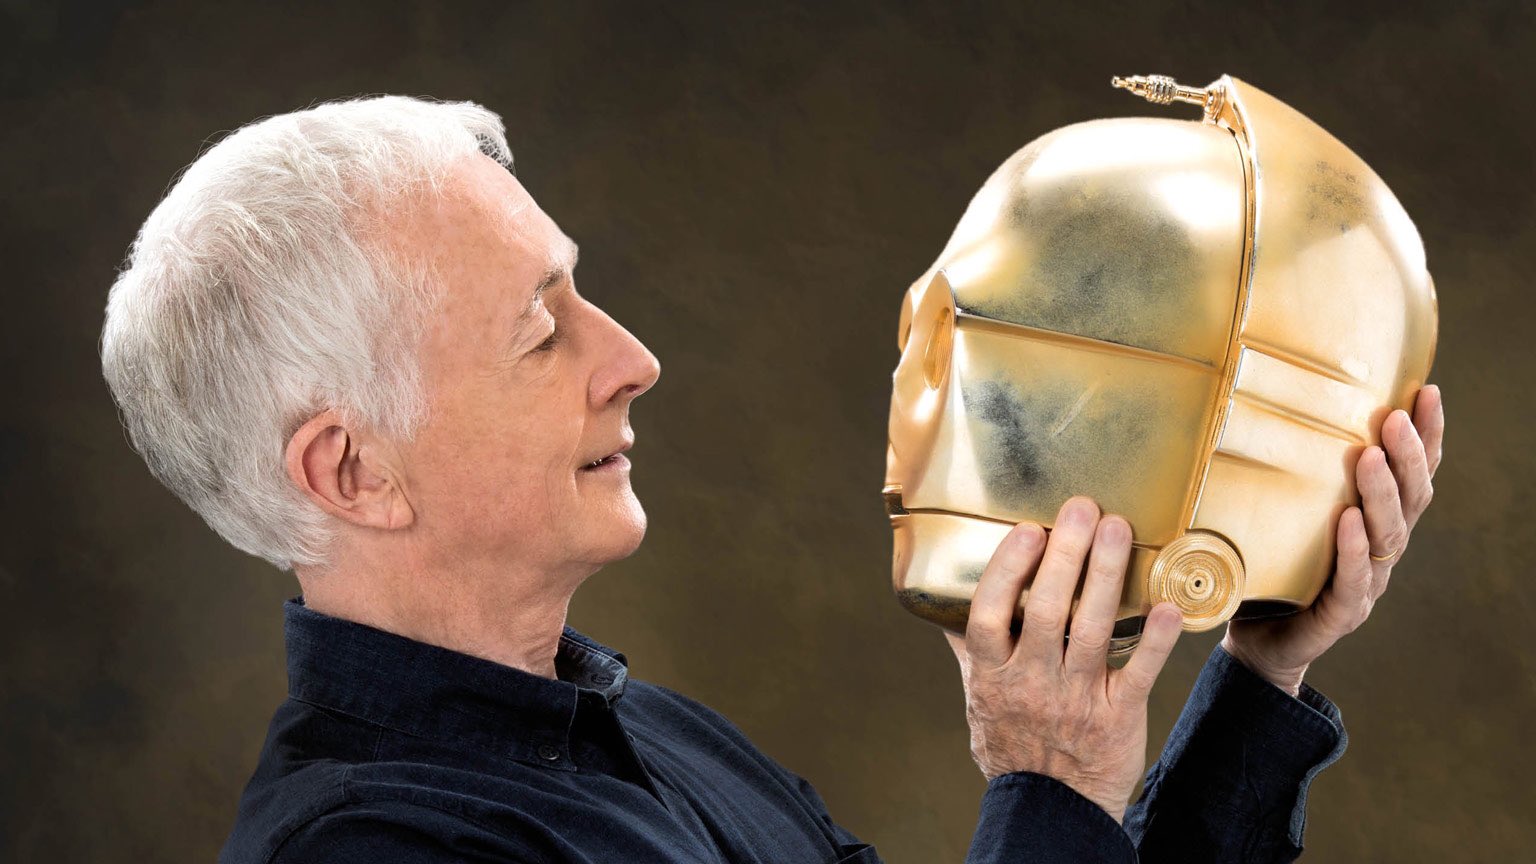 And a very happy birthday to Anthony Daniels 